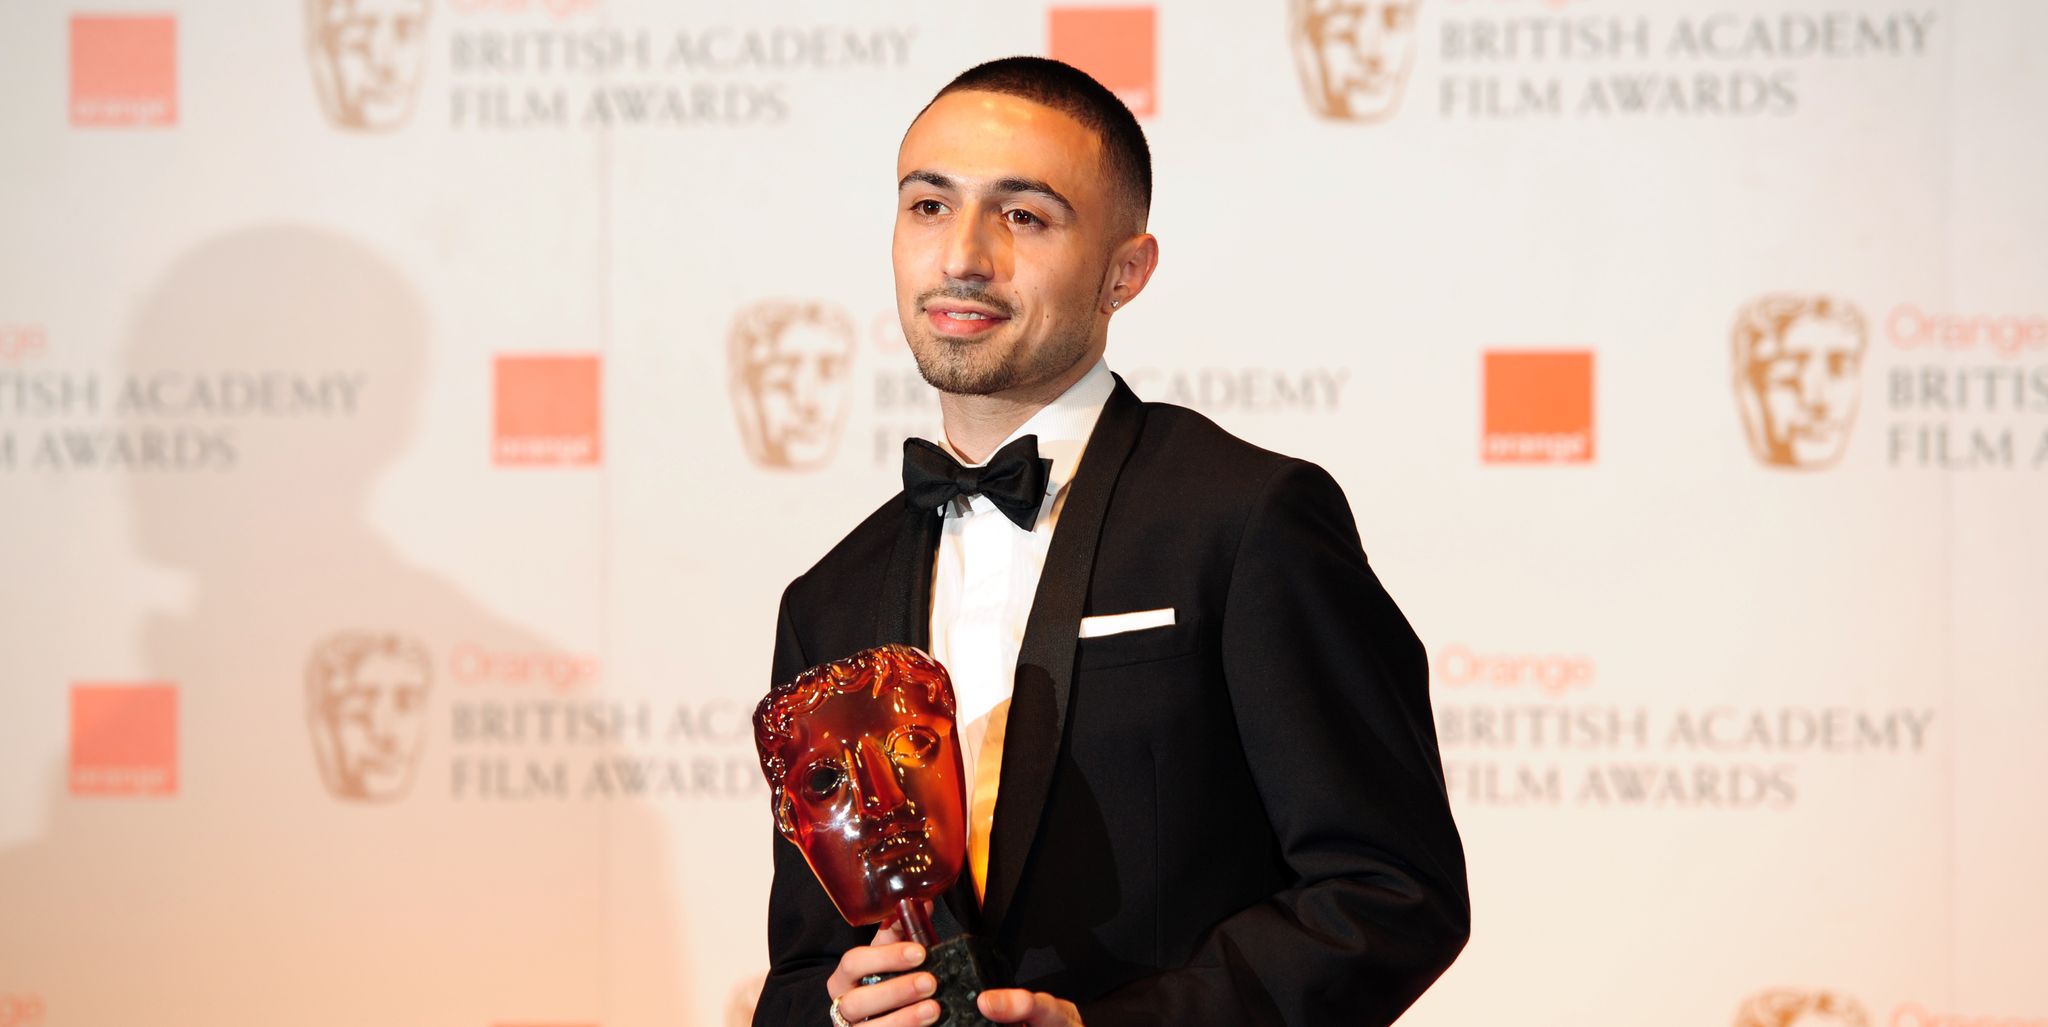 british actor adam deacon poses with the rising star award at the bafta british academy film awards at the royal opera house in london on february 12, 2012  afp photo  leon neal photo credit should read leon nealafp via getty images